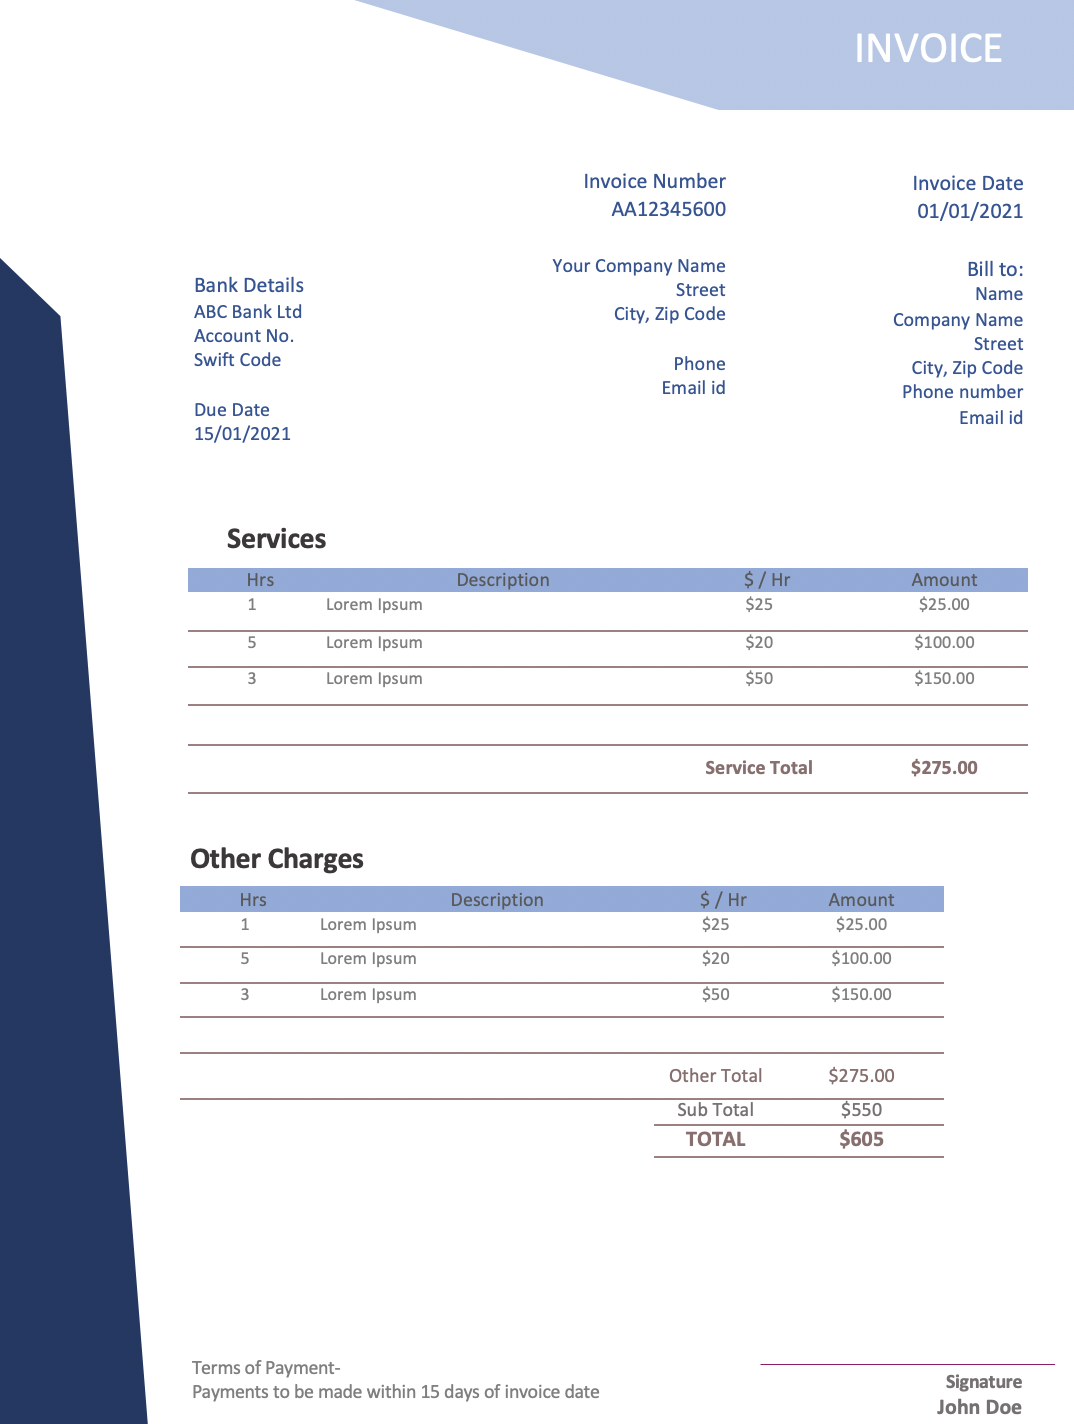 Invoice templates for Word and Excel  Free download Throughout Invoice Template New Zealand